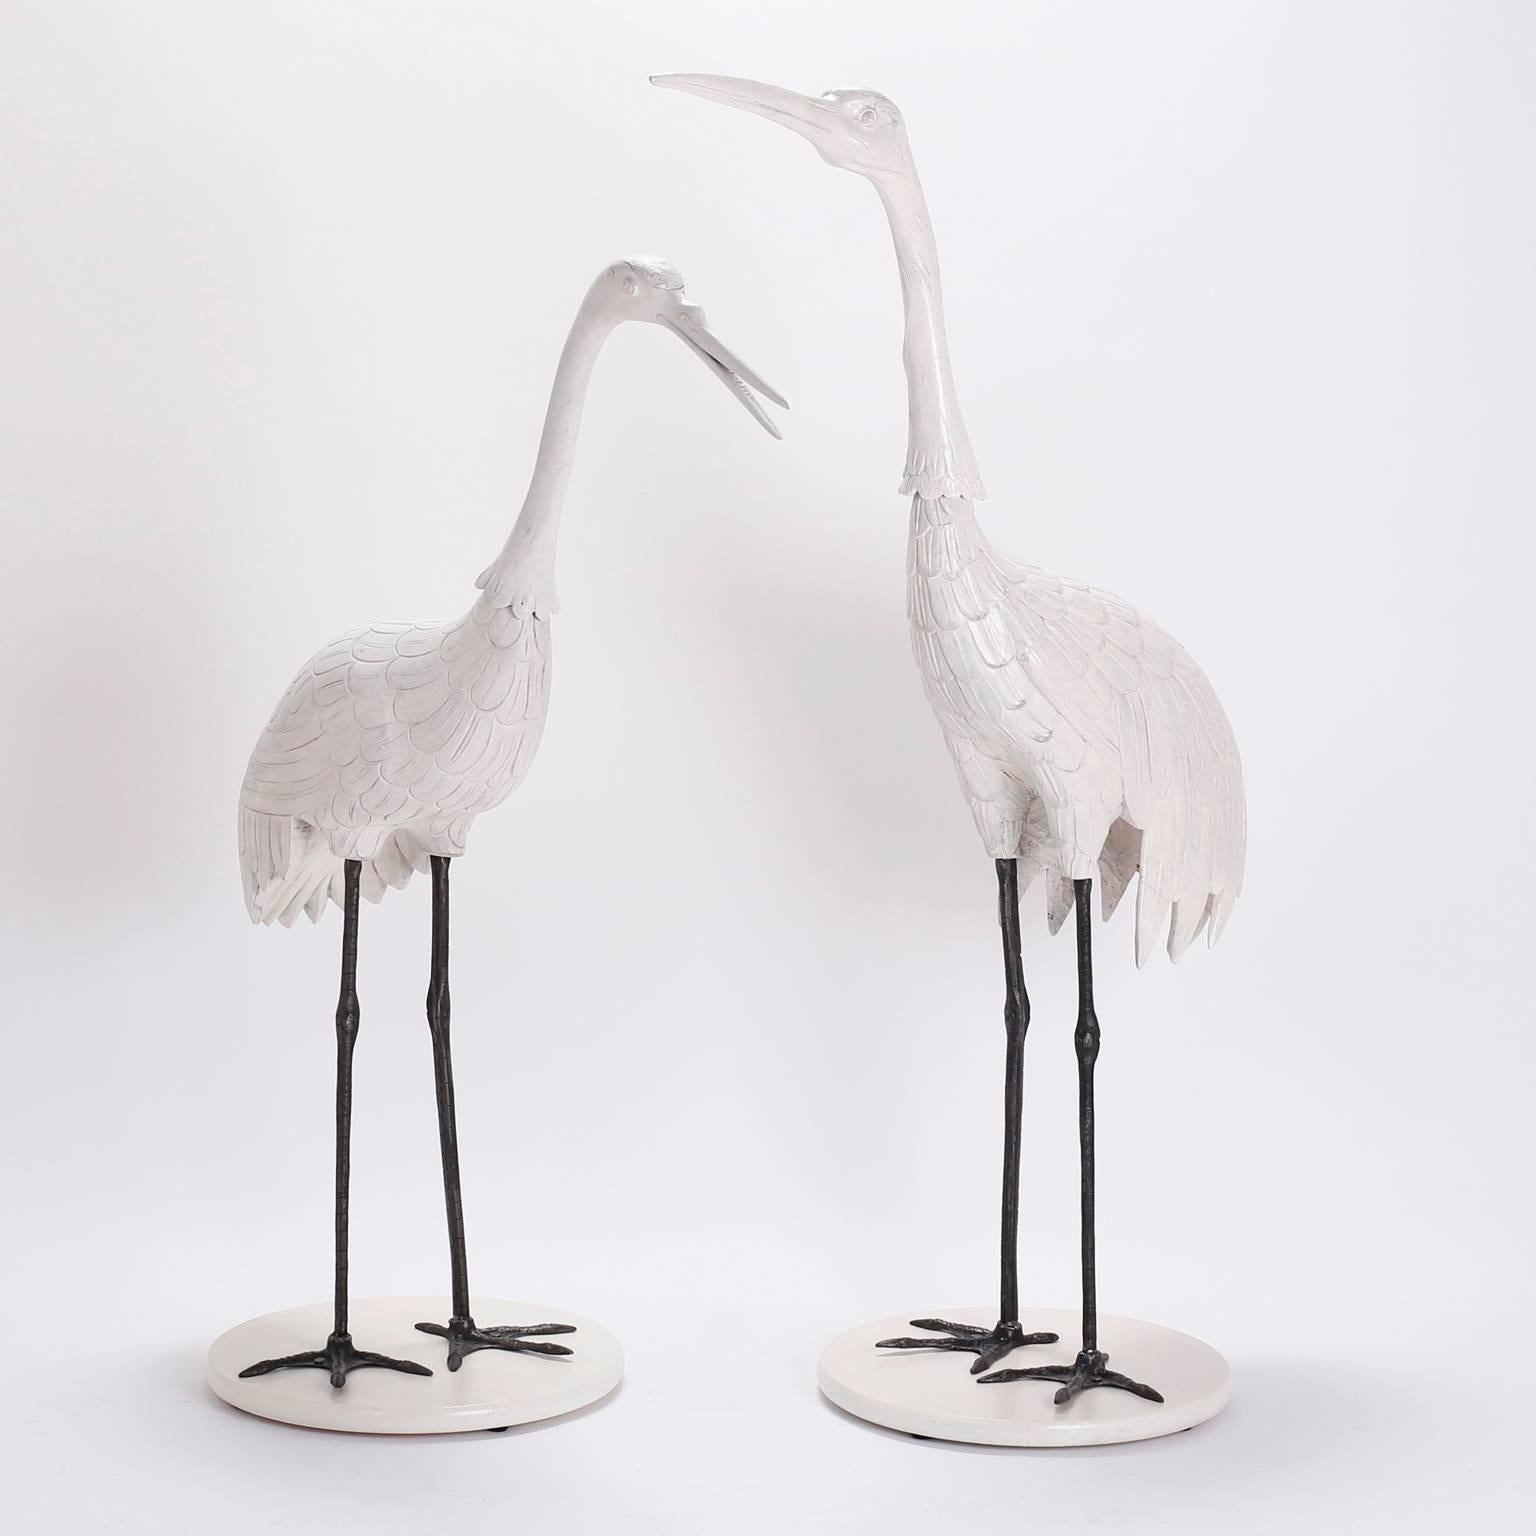 Chic, mid century pair of crane or stork sculptures crafted in carved wood with a custom lacquered finish. The legs are raw iron ,sealed for easy care, presented on round lacquered wood bases. 

From left to right:

H: 50 W: 42 D: 18
H: 56 W: 38 D: